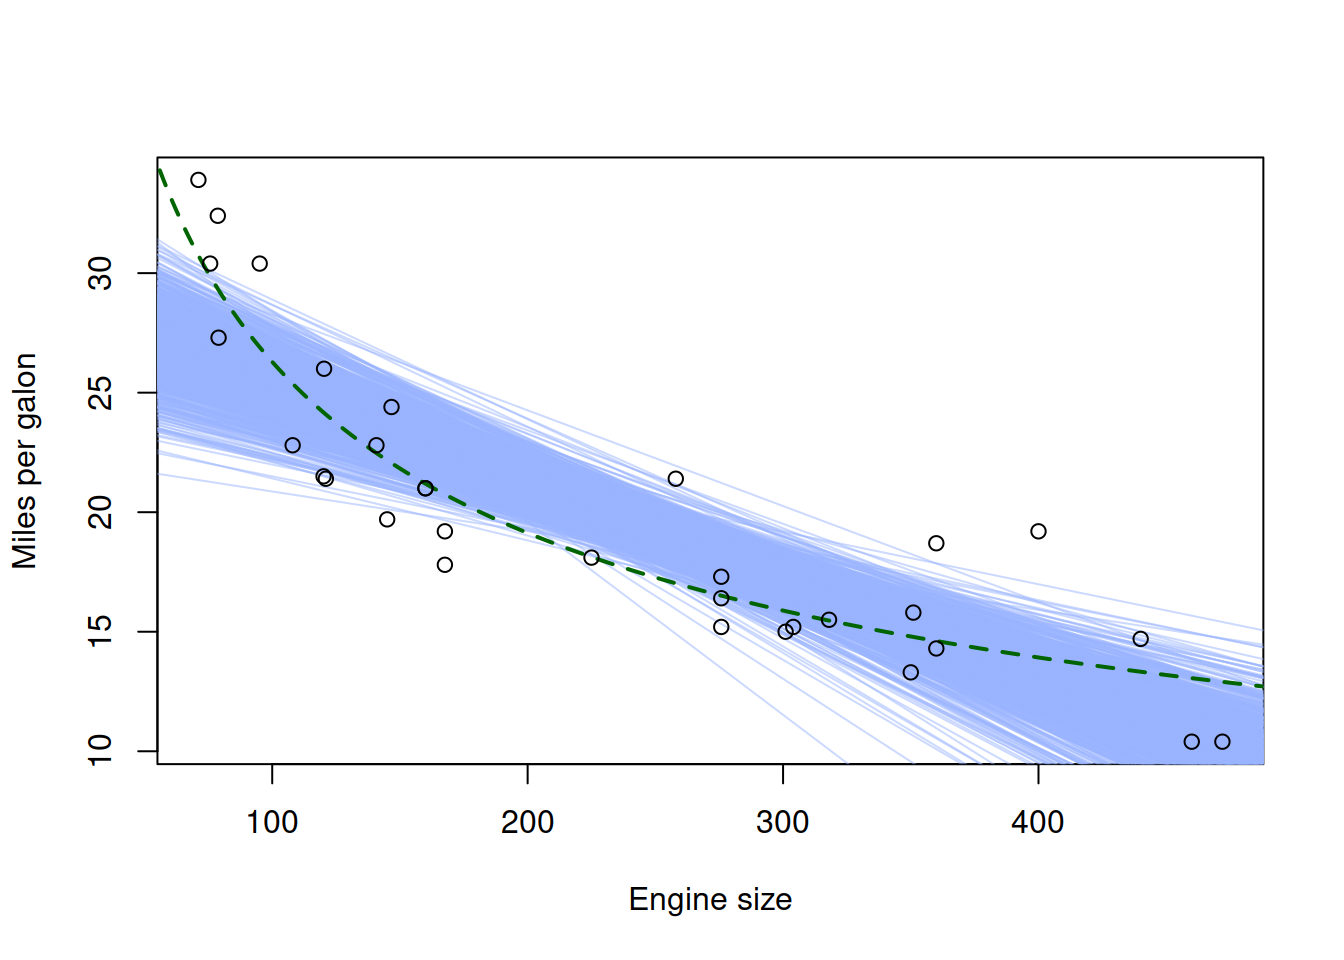 Fuel consumption vs engine size, the true and the linear models